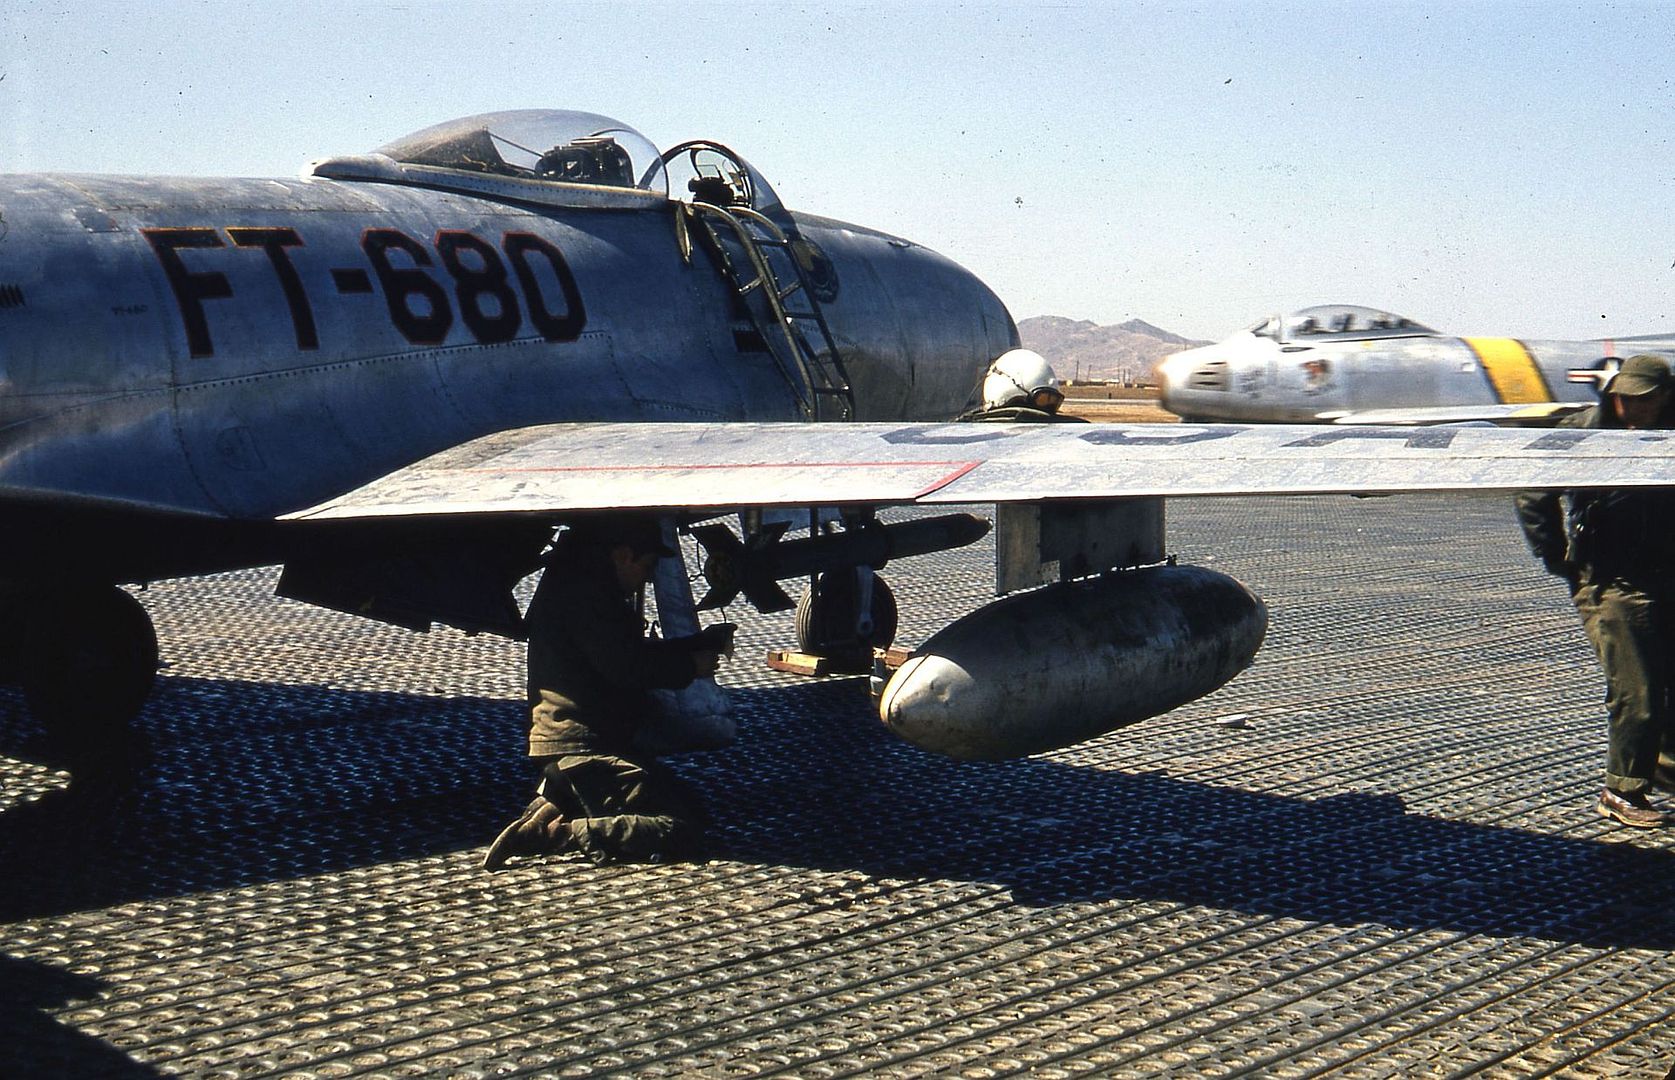 680 Bearing The Markings Of The 36th Fighter Bomber Squadron